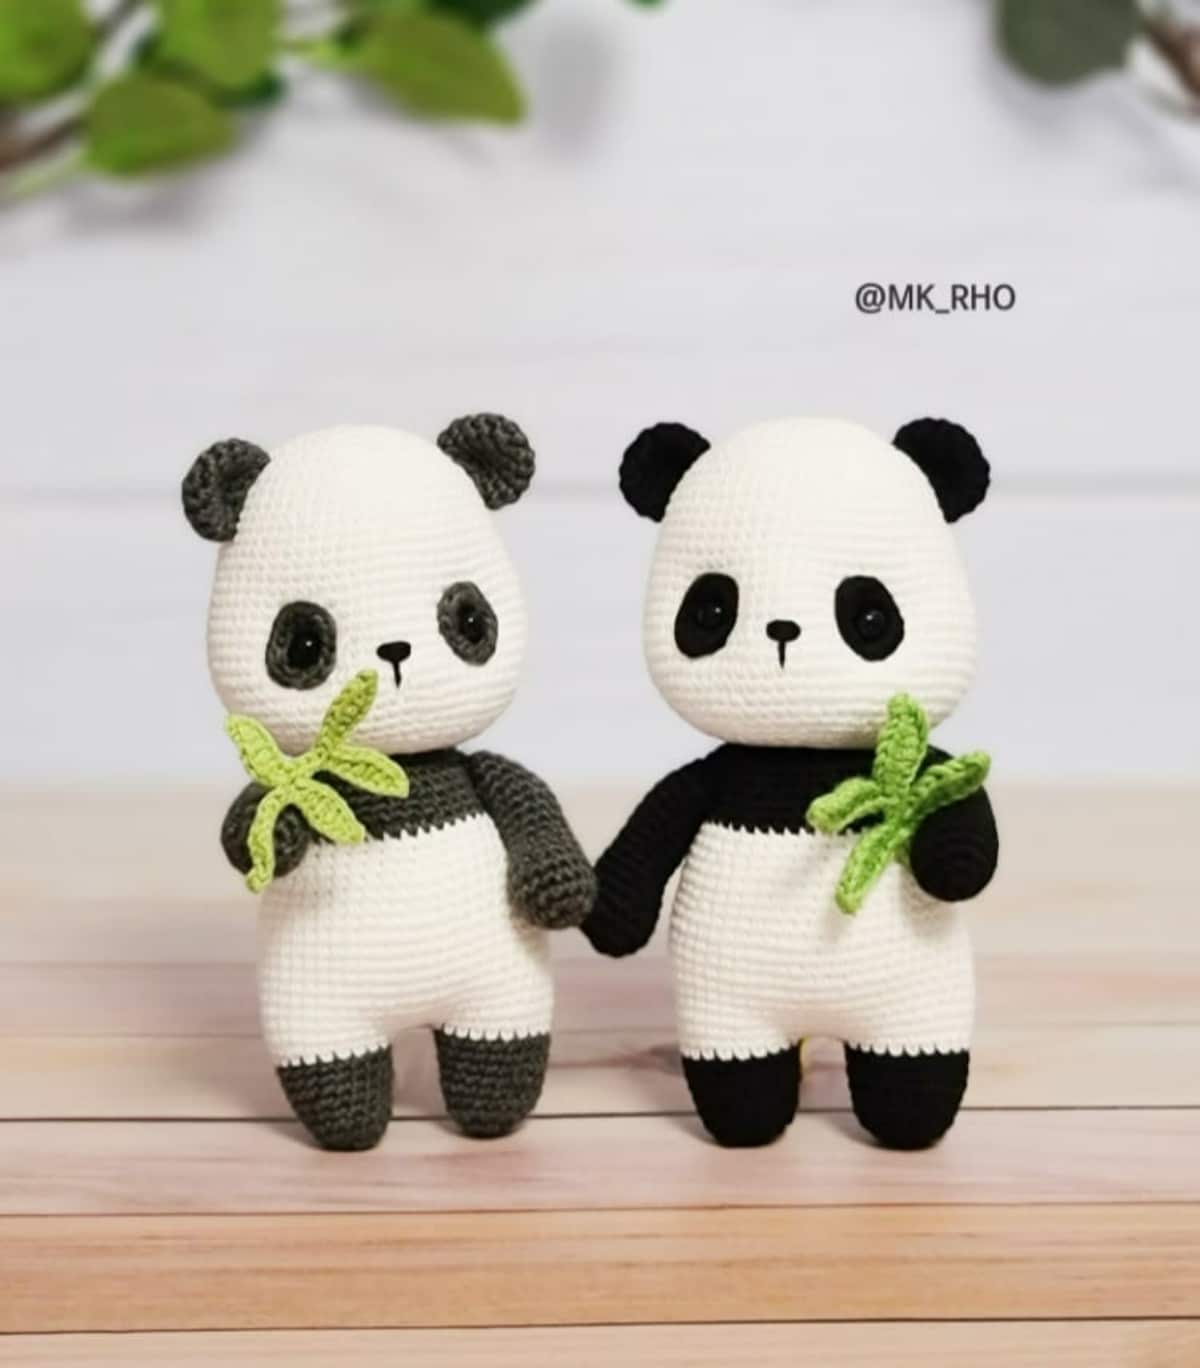 Two crochet panda bears standing next to each other with black arms and feet and white bodies holding green bamboo shoots.